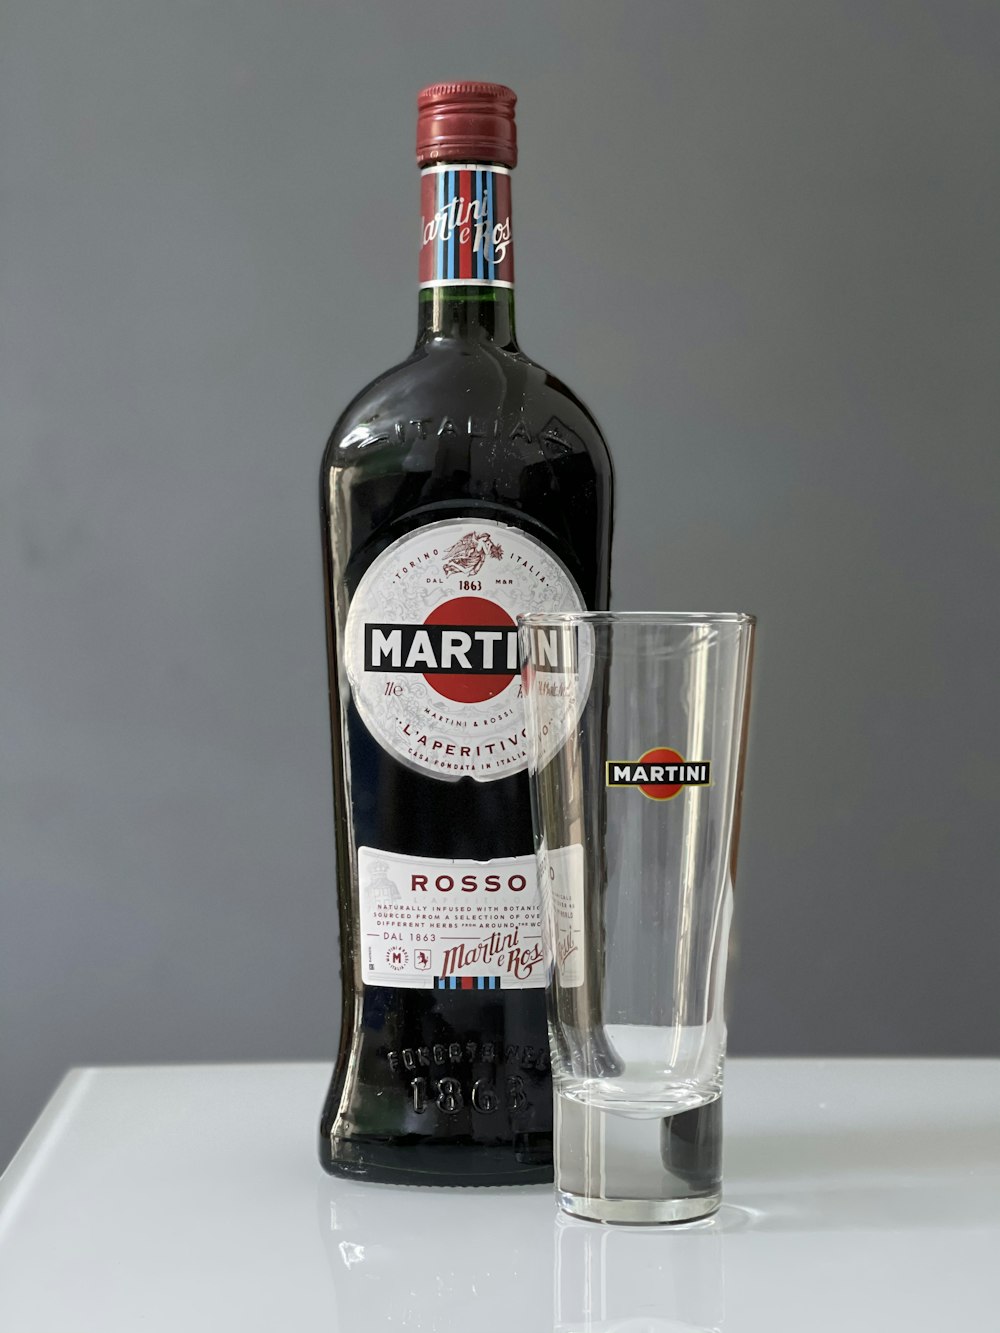 a bottle of martini next to a shot glass